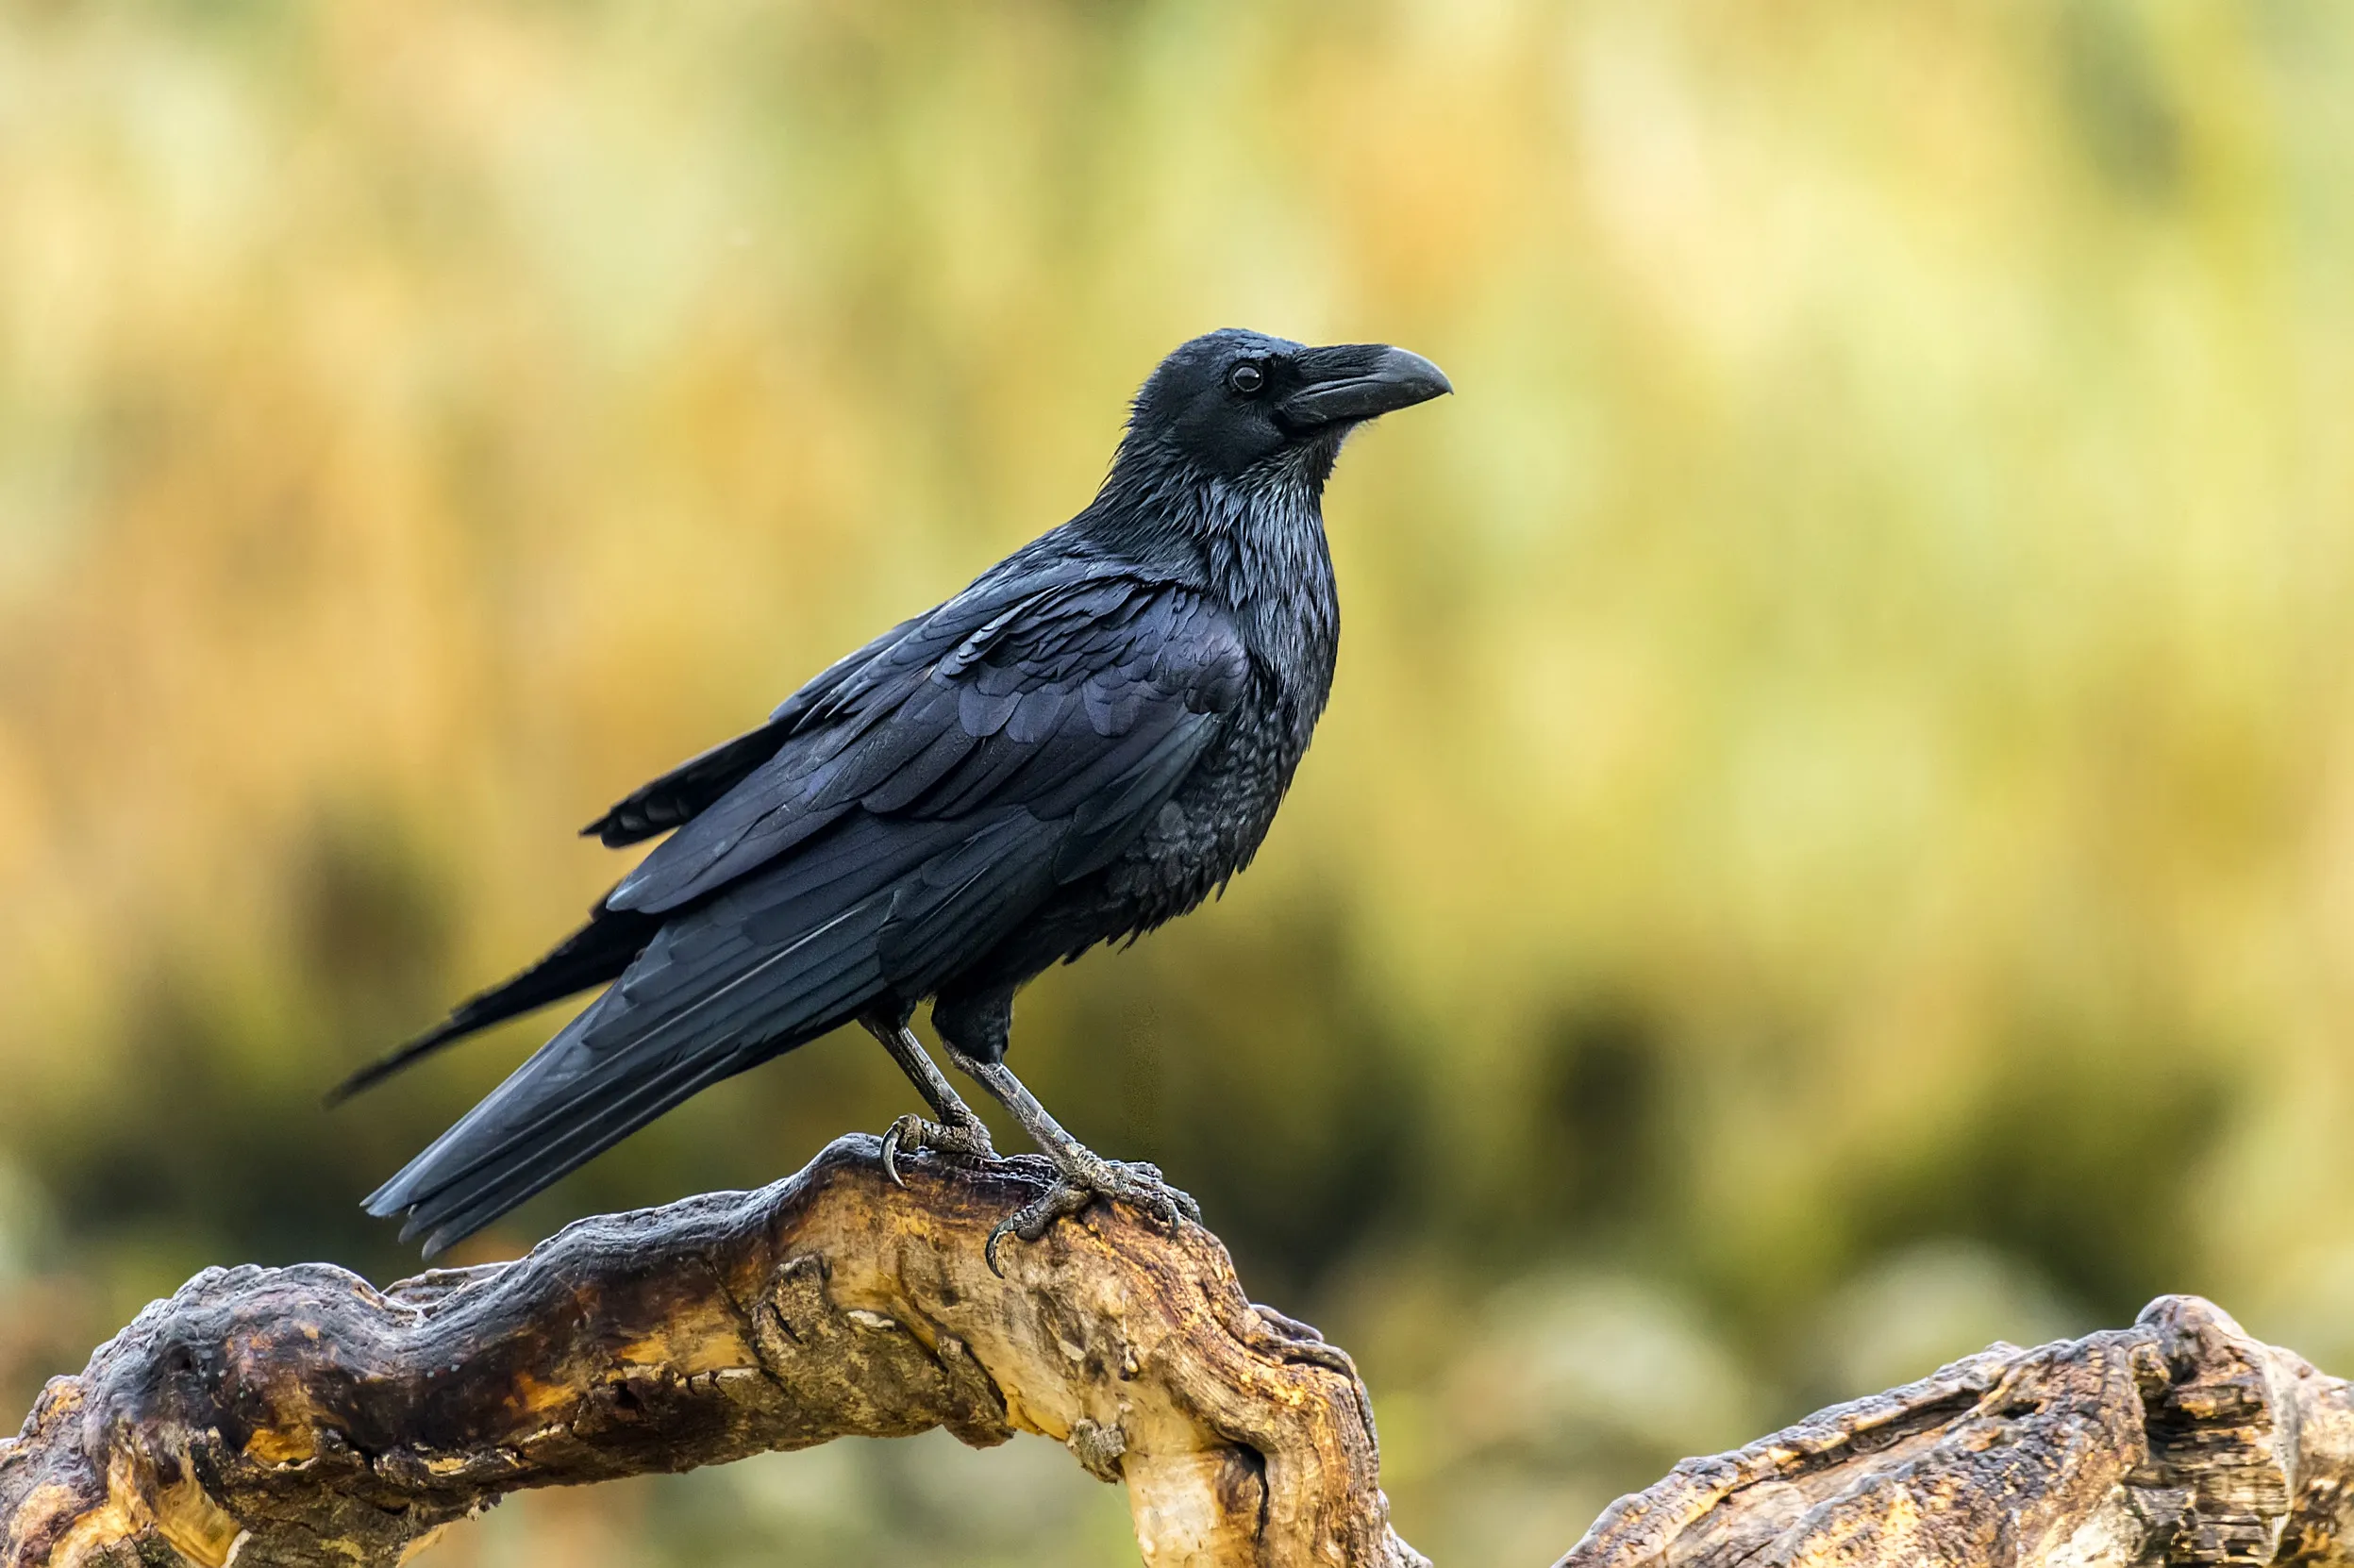 A Raven stood on a branch looking out towards the vegetation.